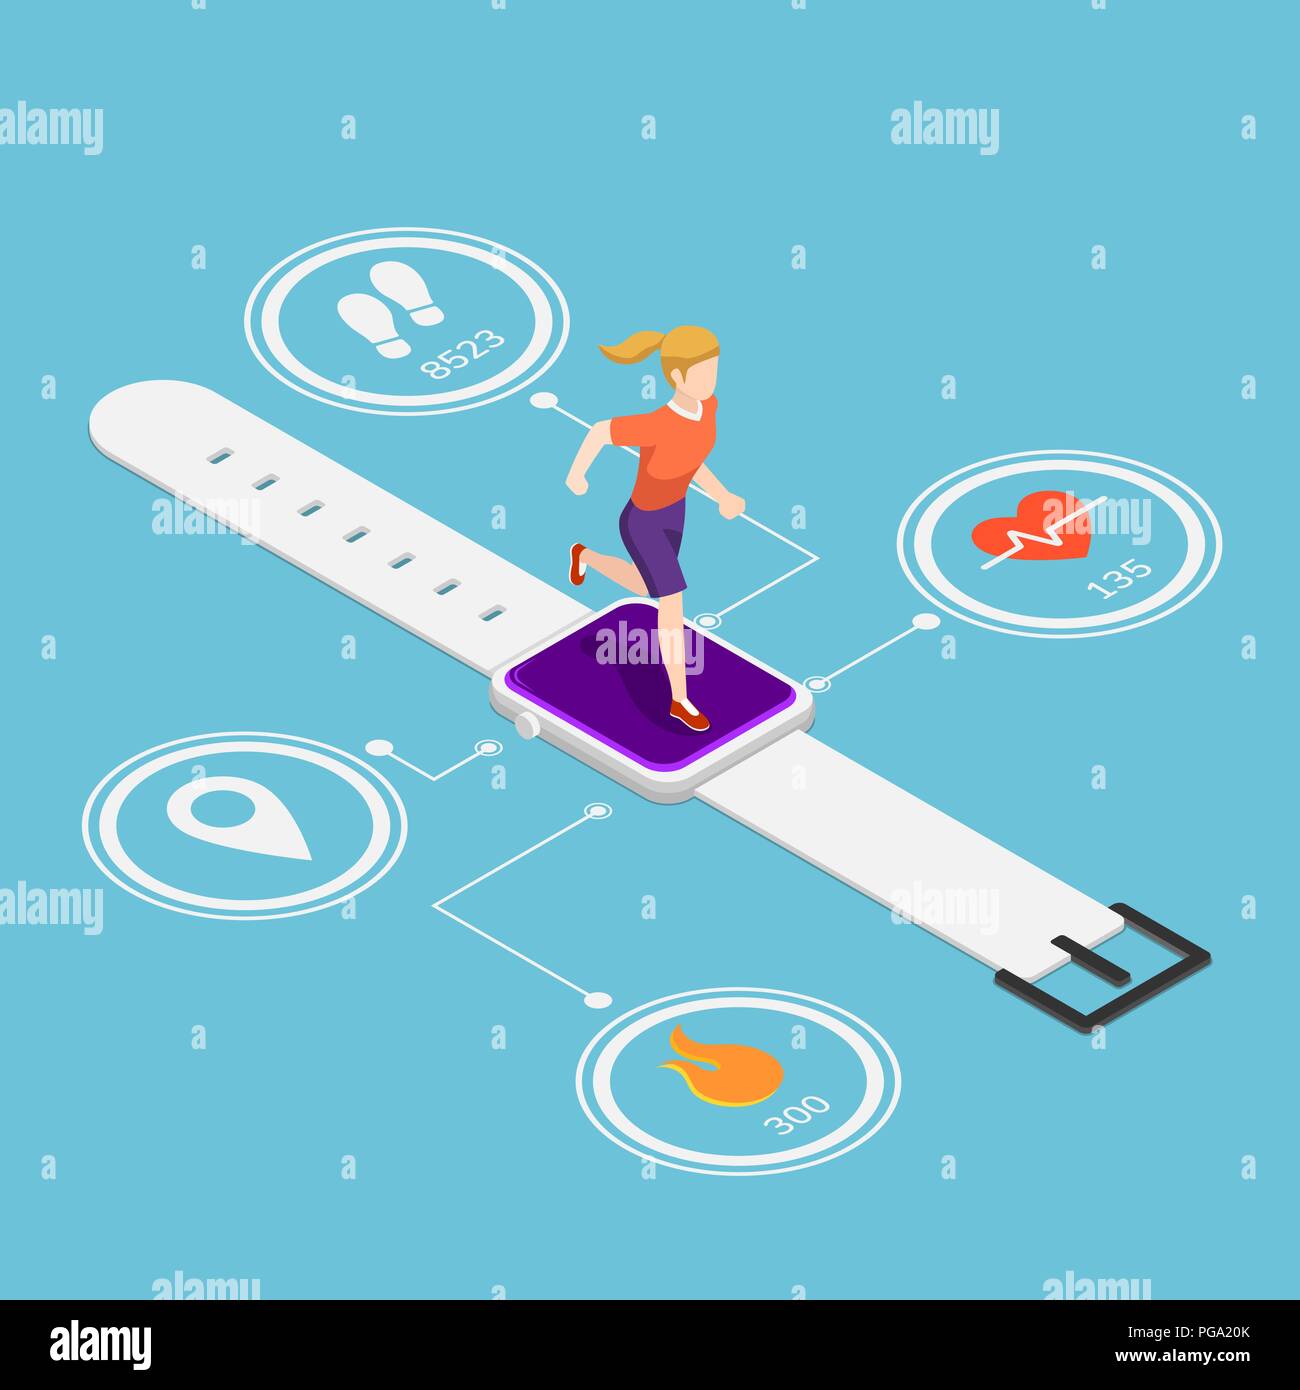 Flat 3d isometric woman running on smartwatch with heart rate monitors, counting calories, count steps and GPS technolog function. Wearable device tec Stock Vector